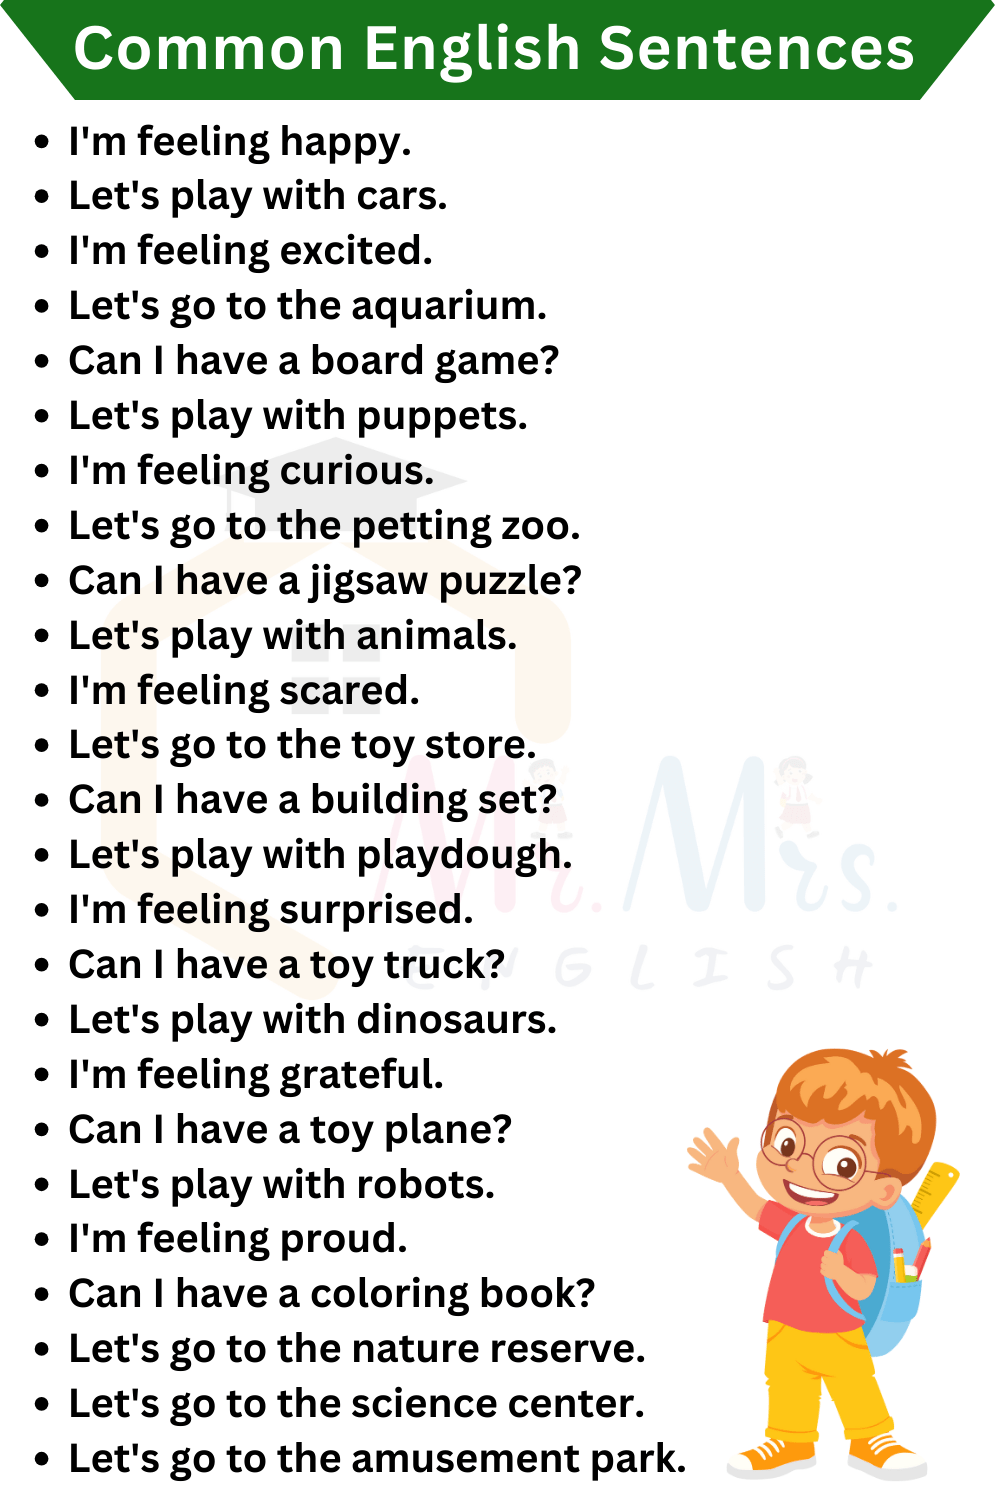 Daily Used English Sentences for Kids